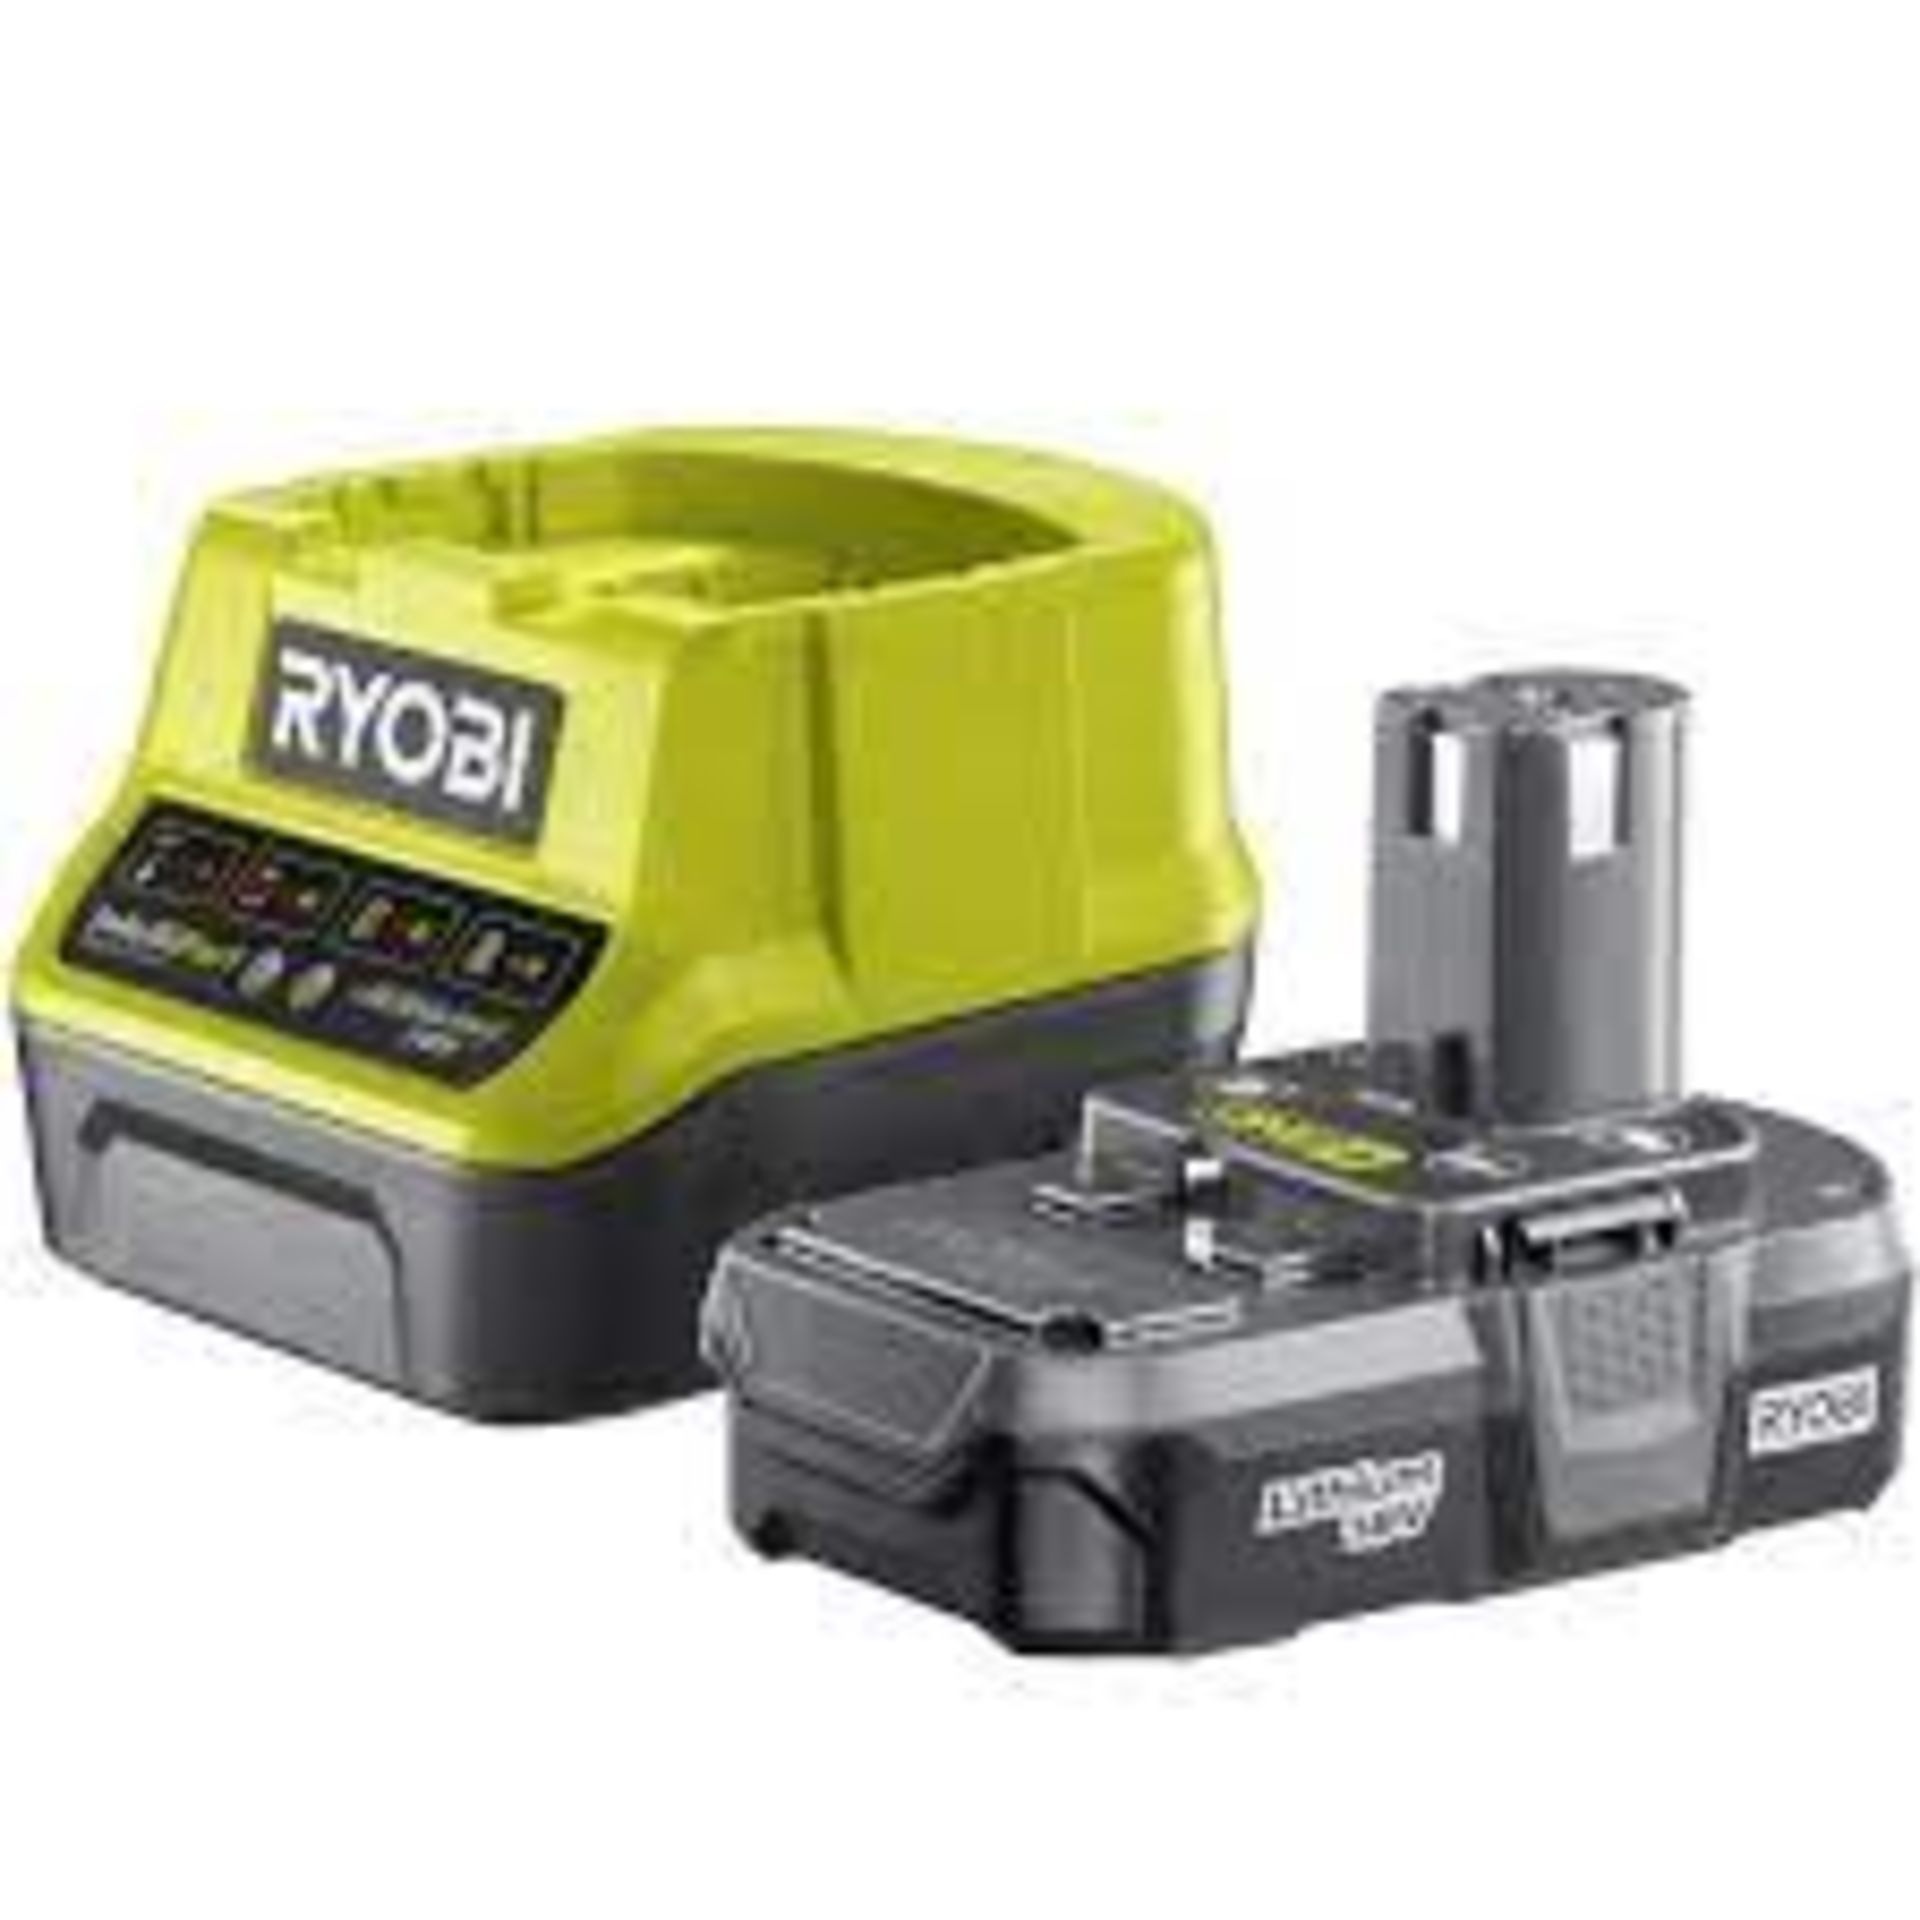 Ryobi RC18120-120 ONE+ 18v Cordless Fast Battery Charger and Li-ion Battery 2ah - ER47. 2.0ah